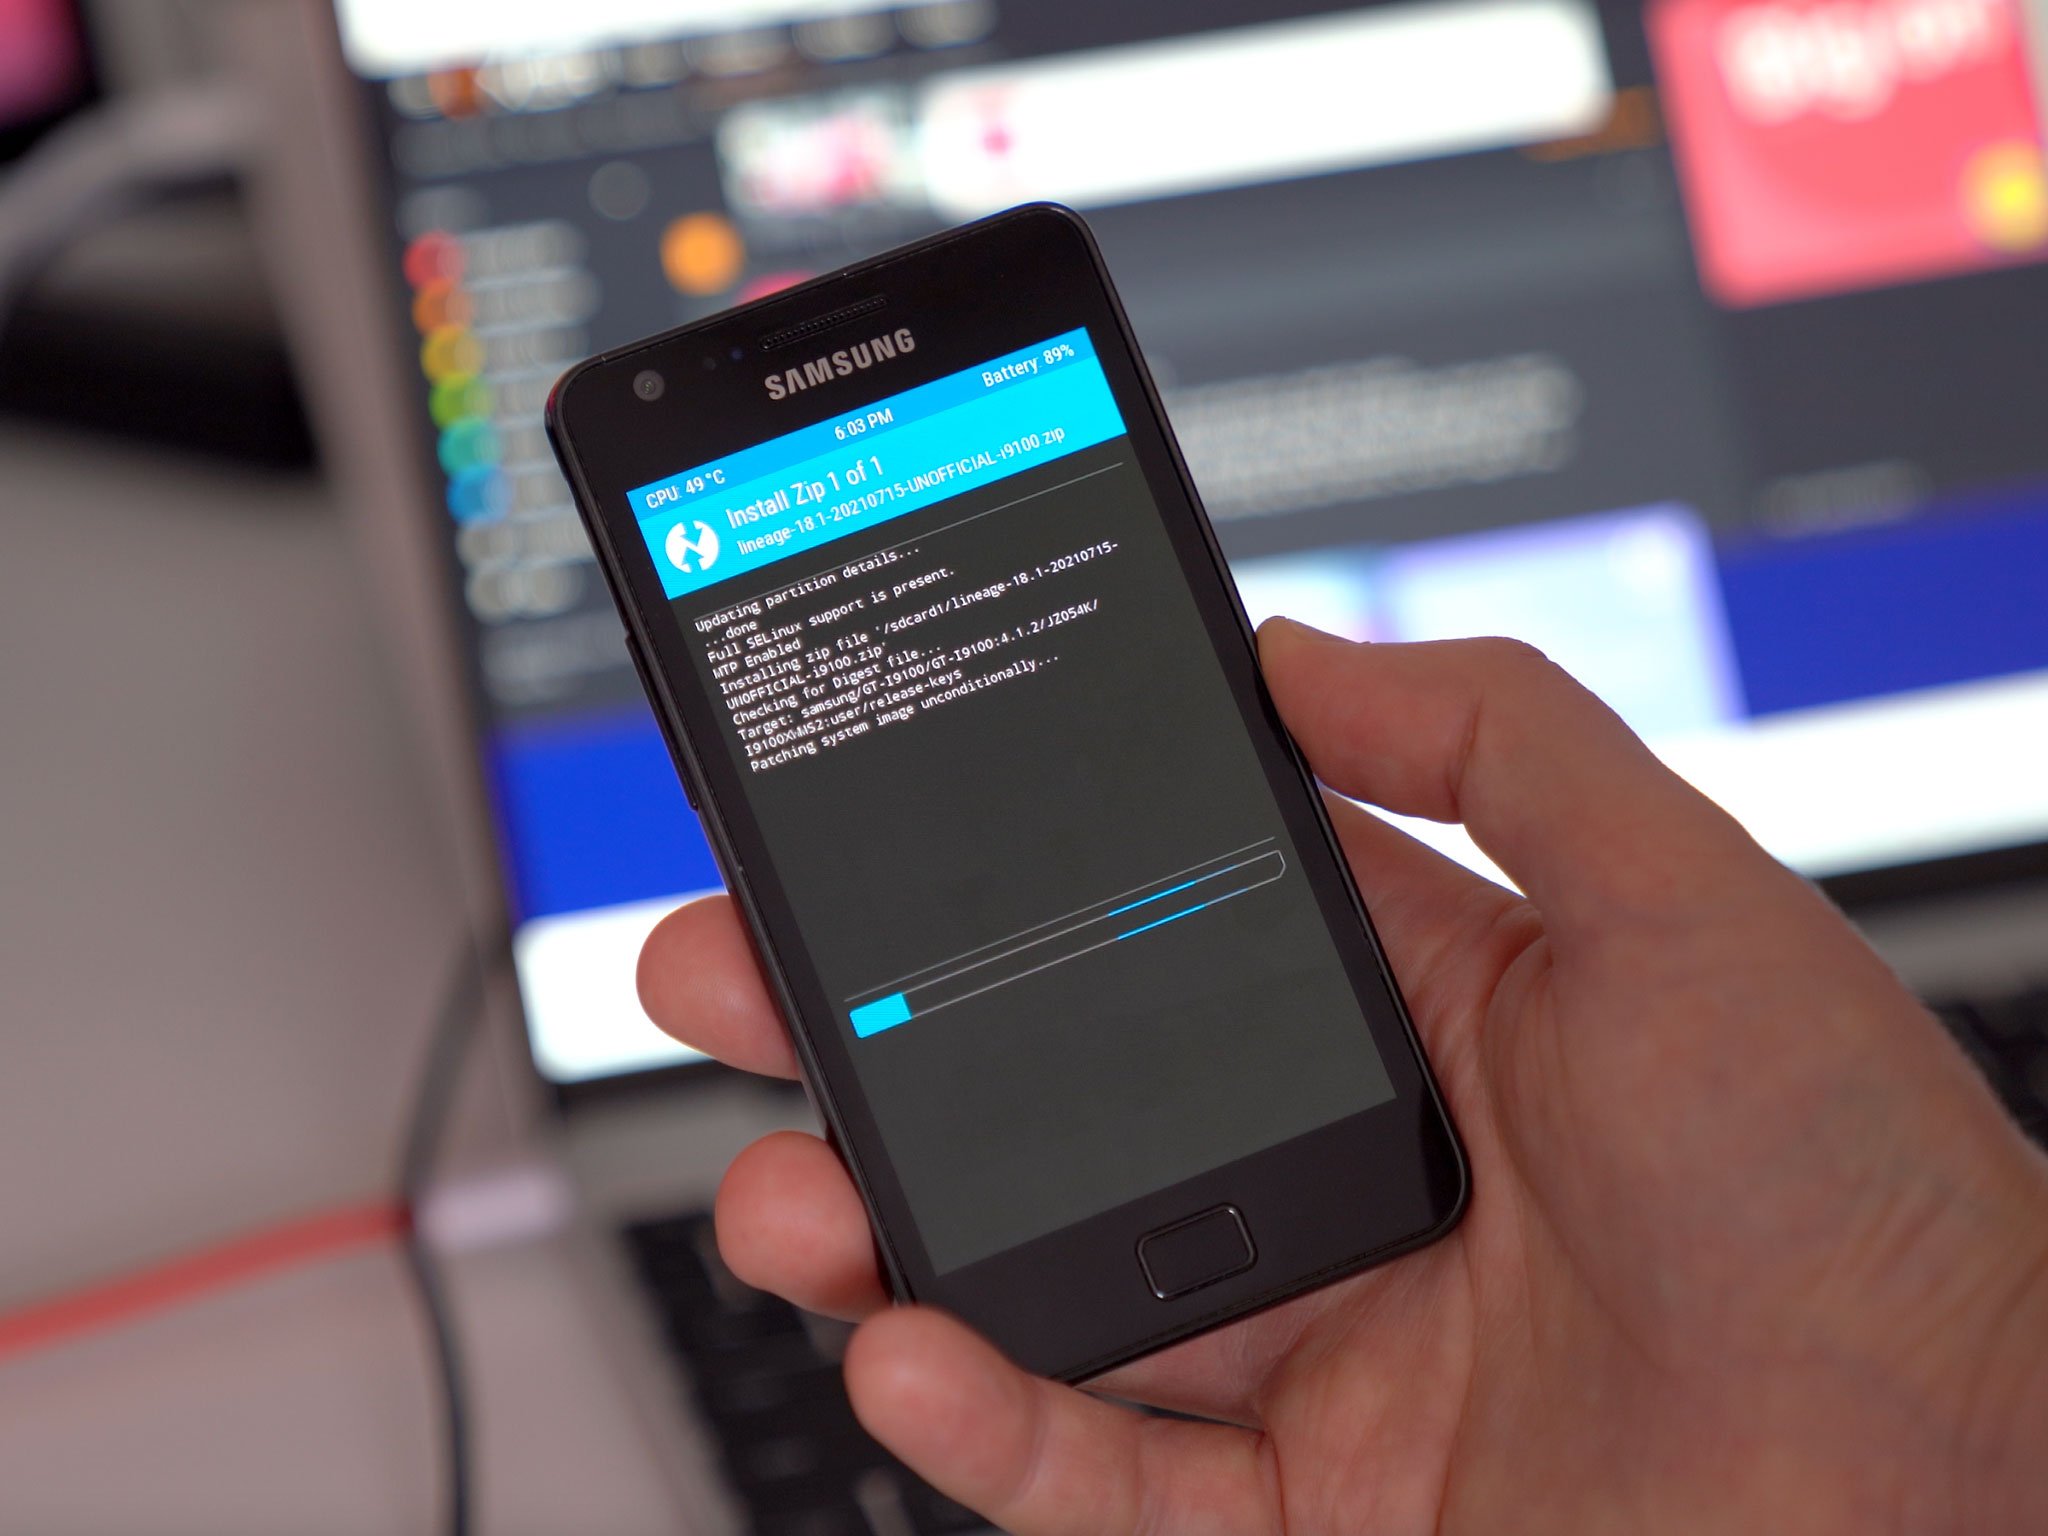 Galaxy S2 TWRP recovery